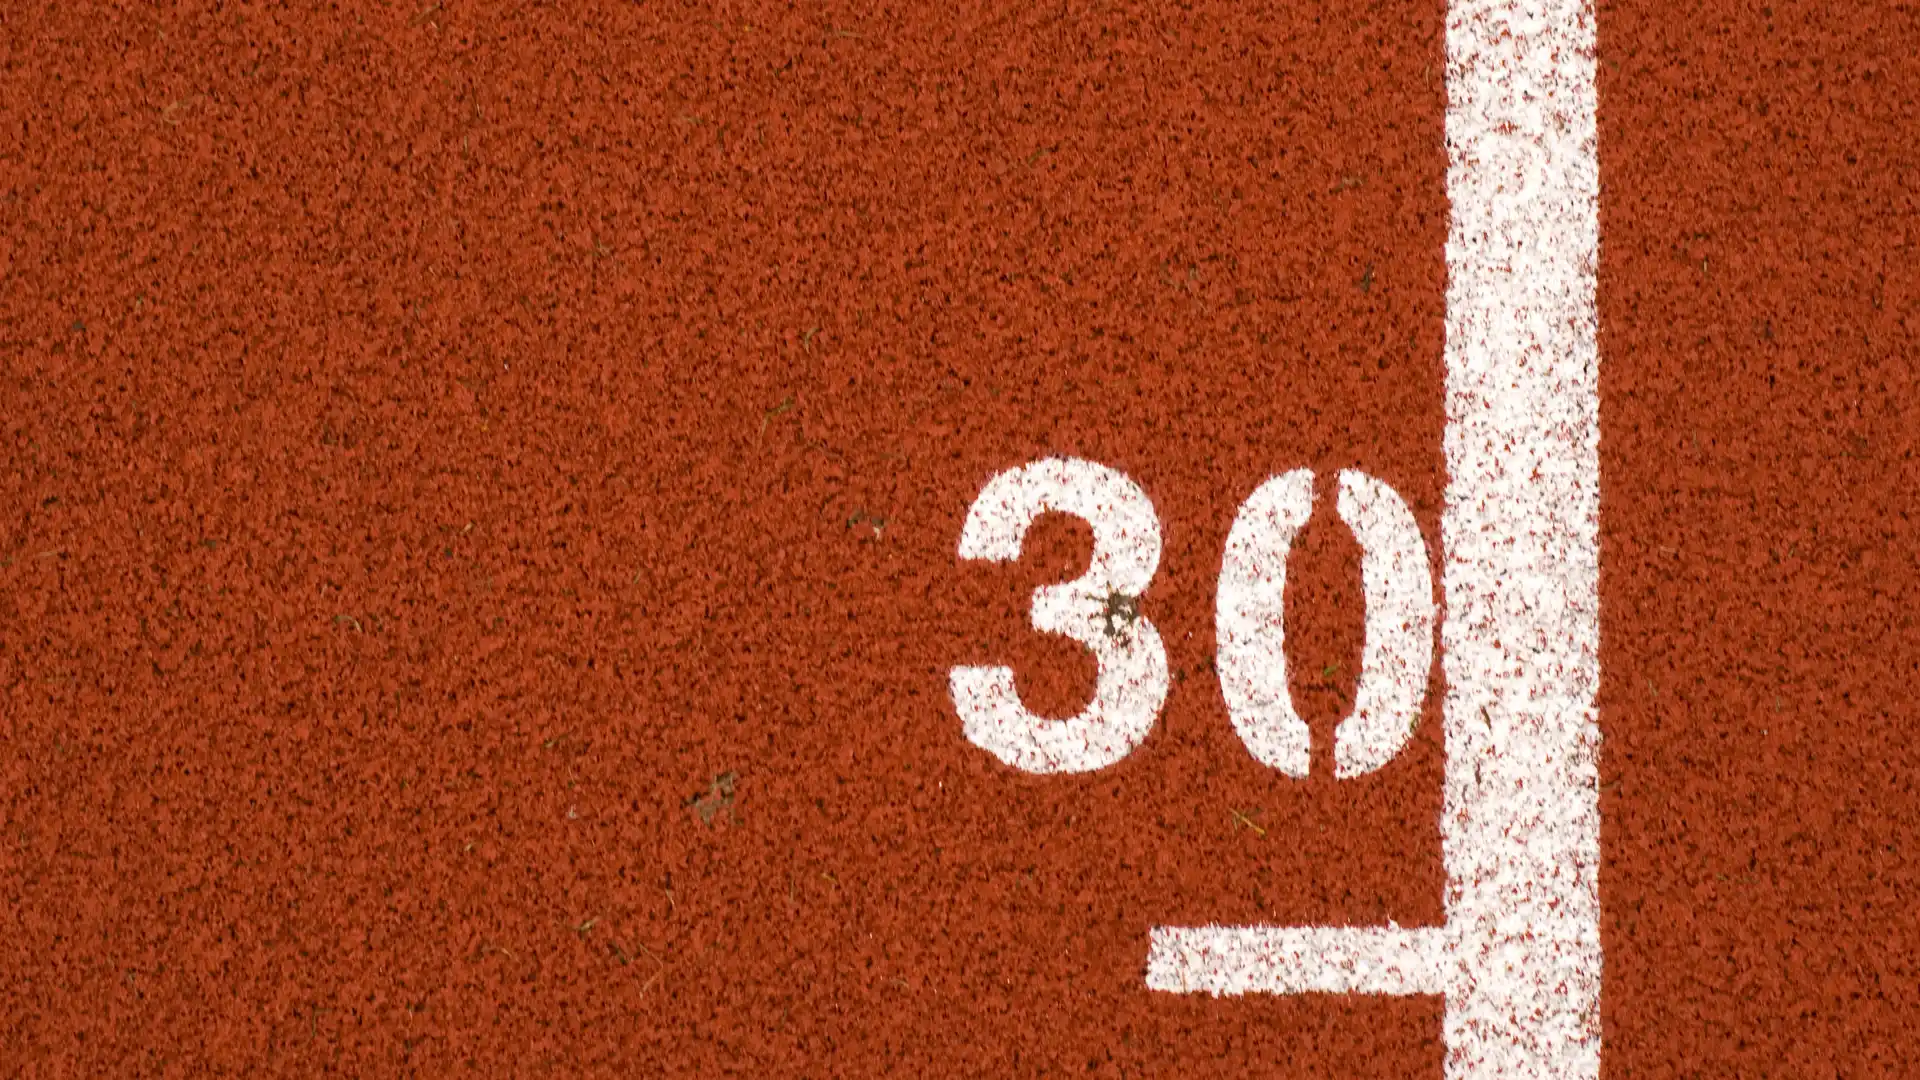 "30" mark on running track that means the 30 day mobile plan